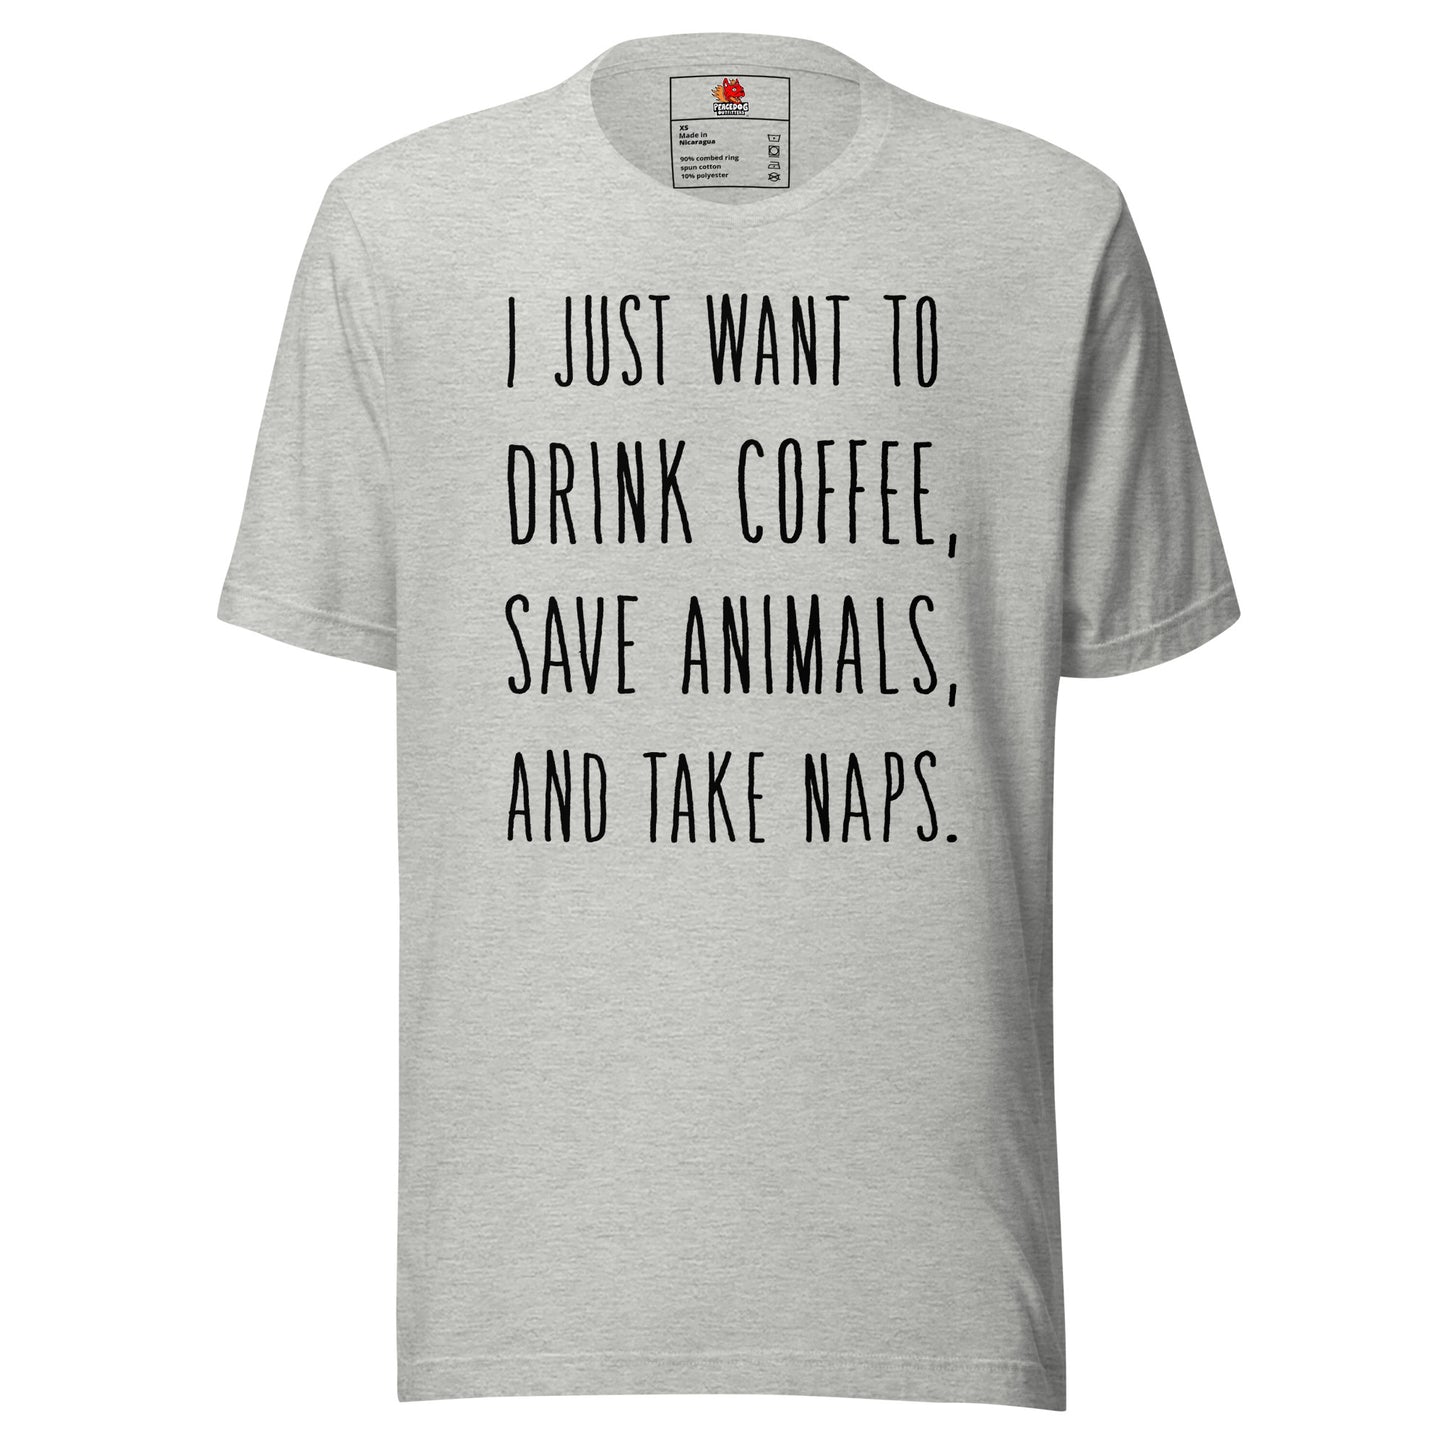 I Just Want Coffee and to Save Animals... T-shirt